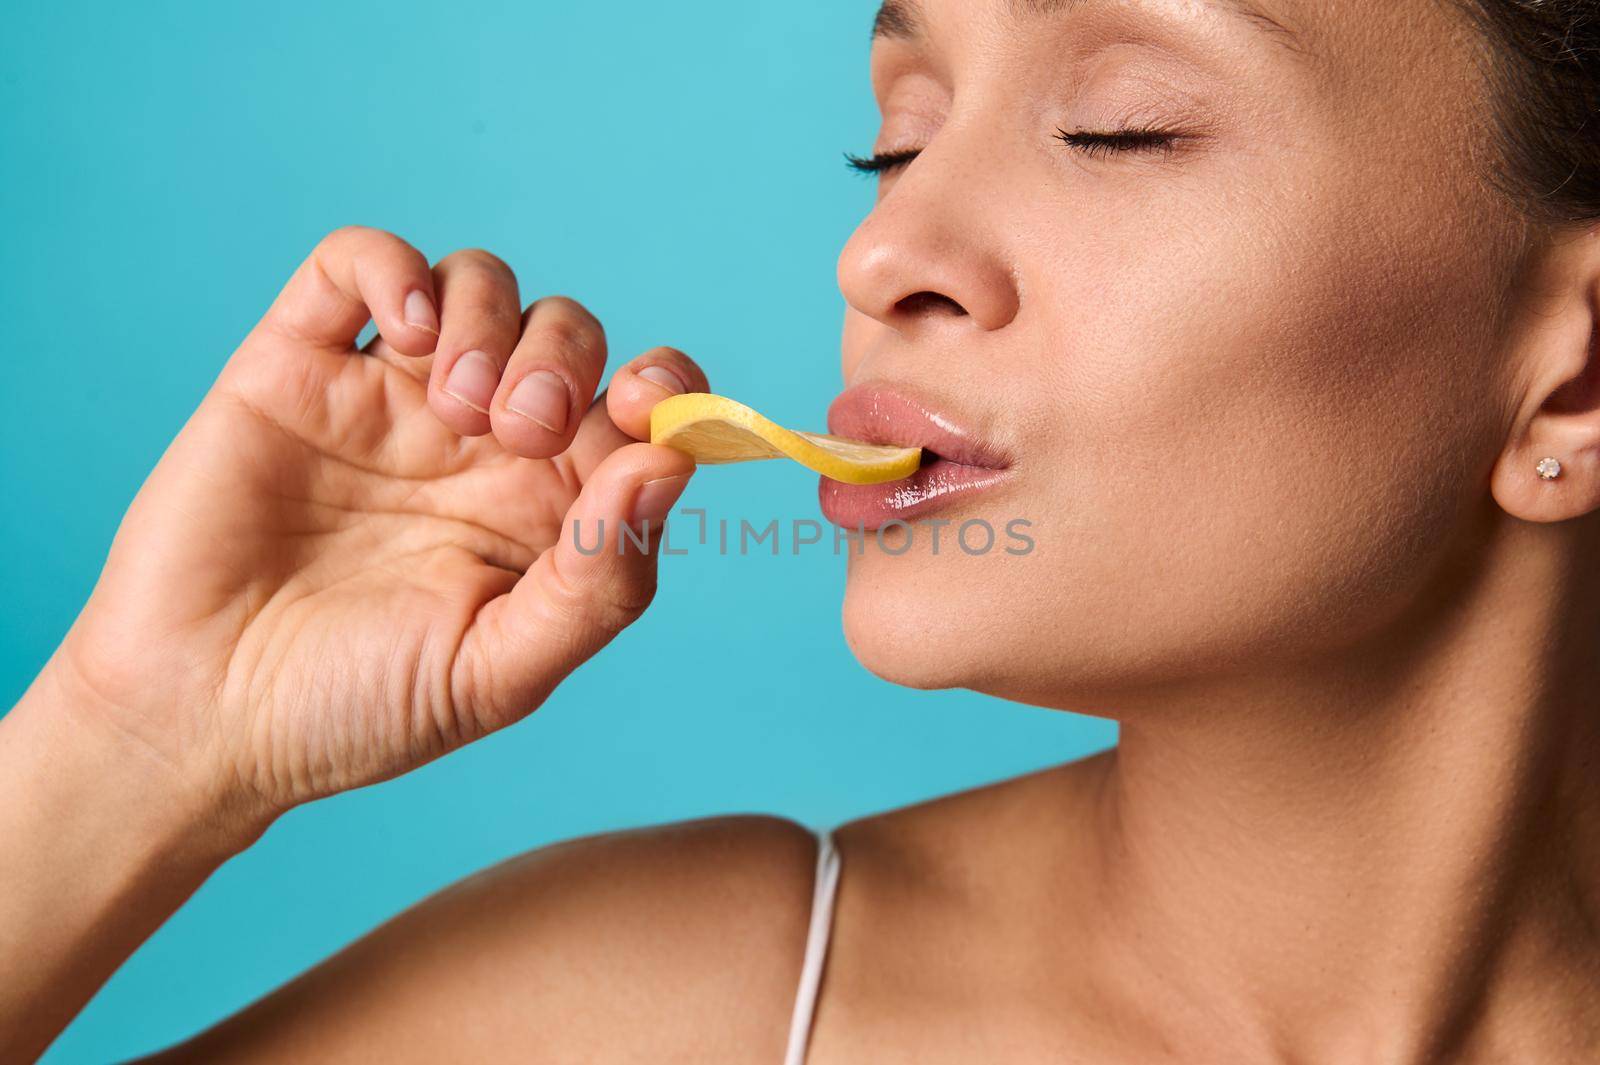 Headshot of a beautiful woman with healthy clean fresh glowing skin eating slice of lemon, posing with her eyes closed against bright blue colored background. Skin, body, health care concept. Close-up